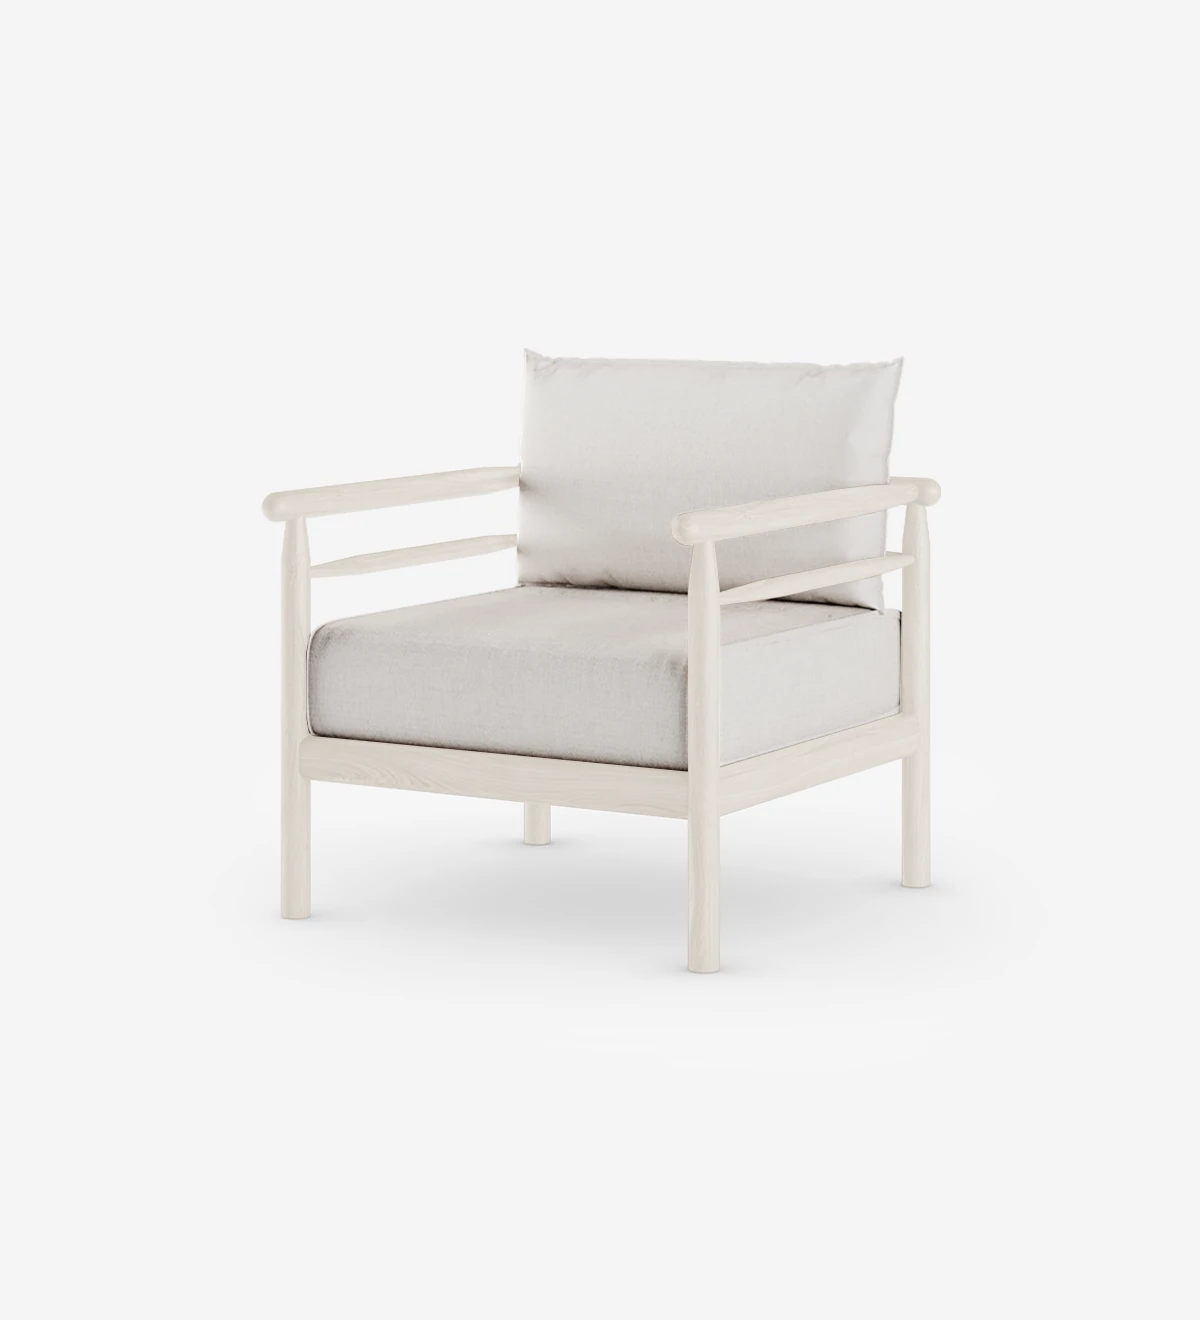 Maple with fabric upholstered cushions and pearl lacquered structure.